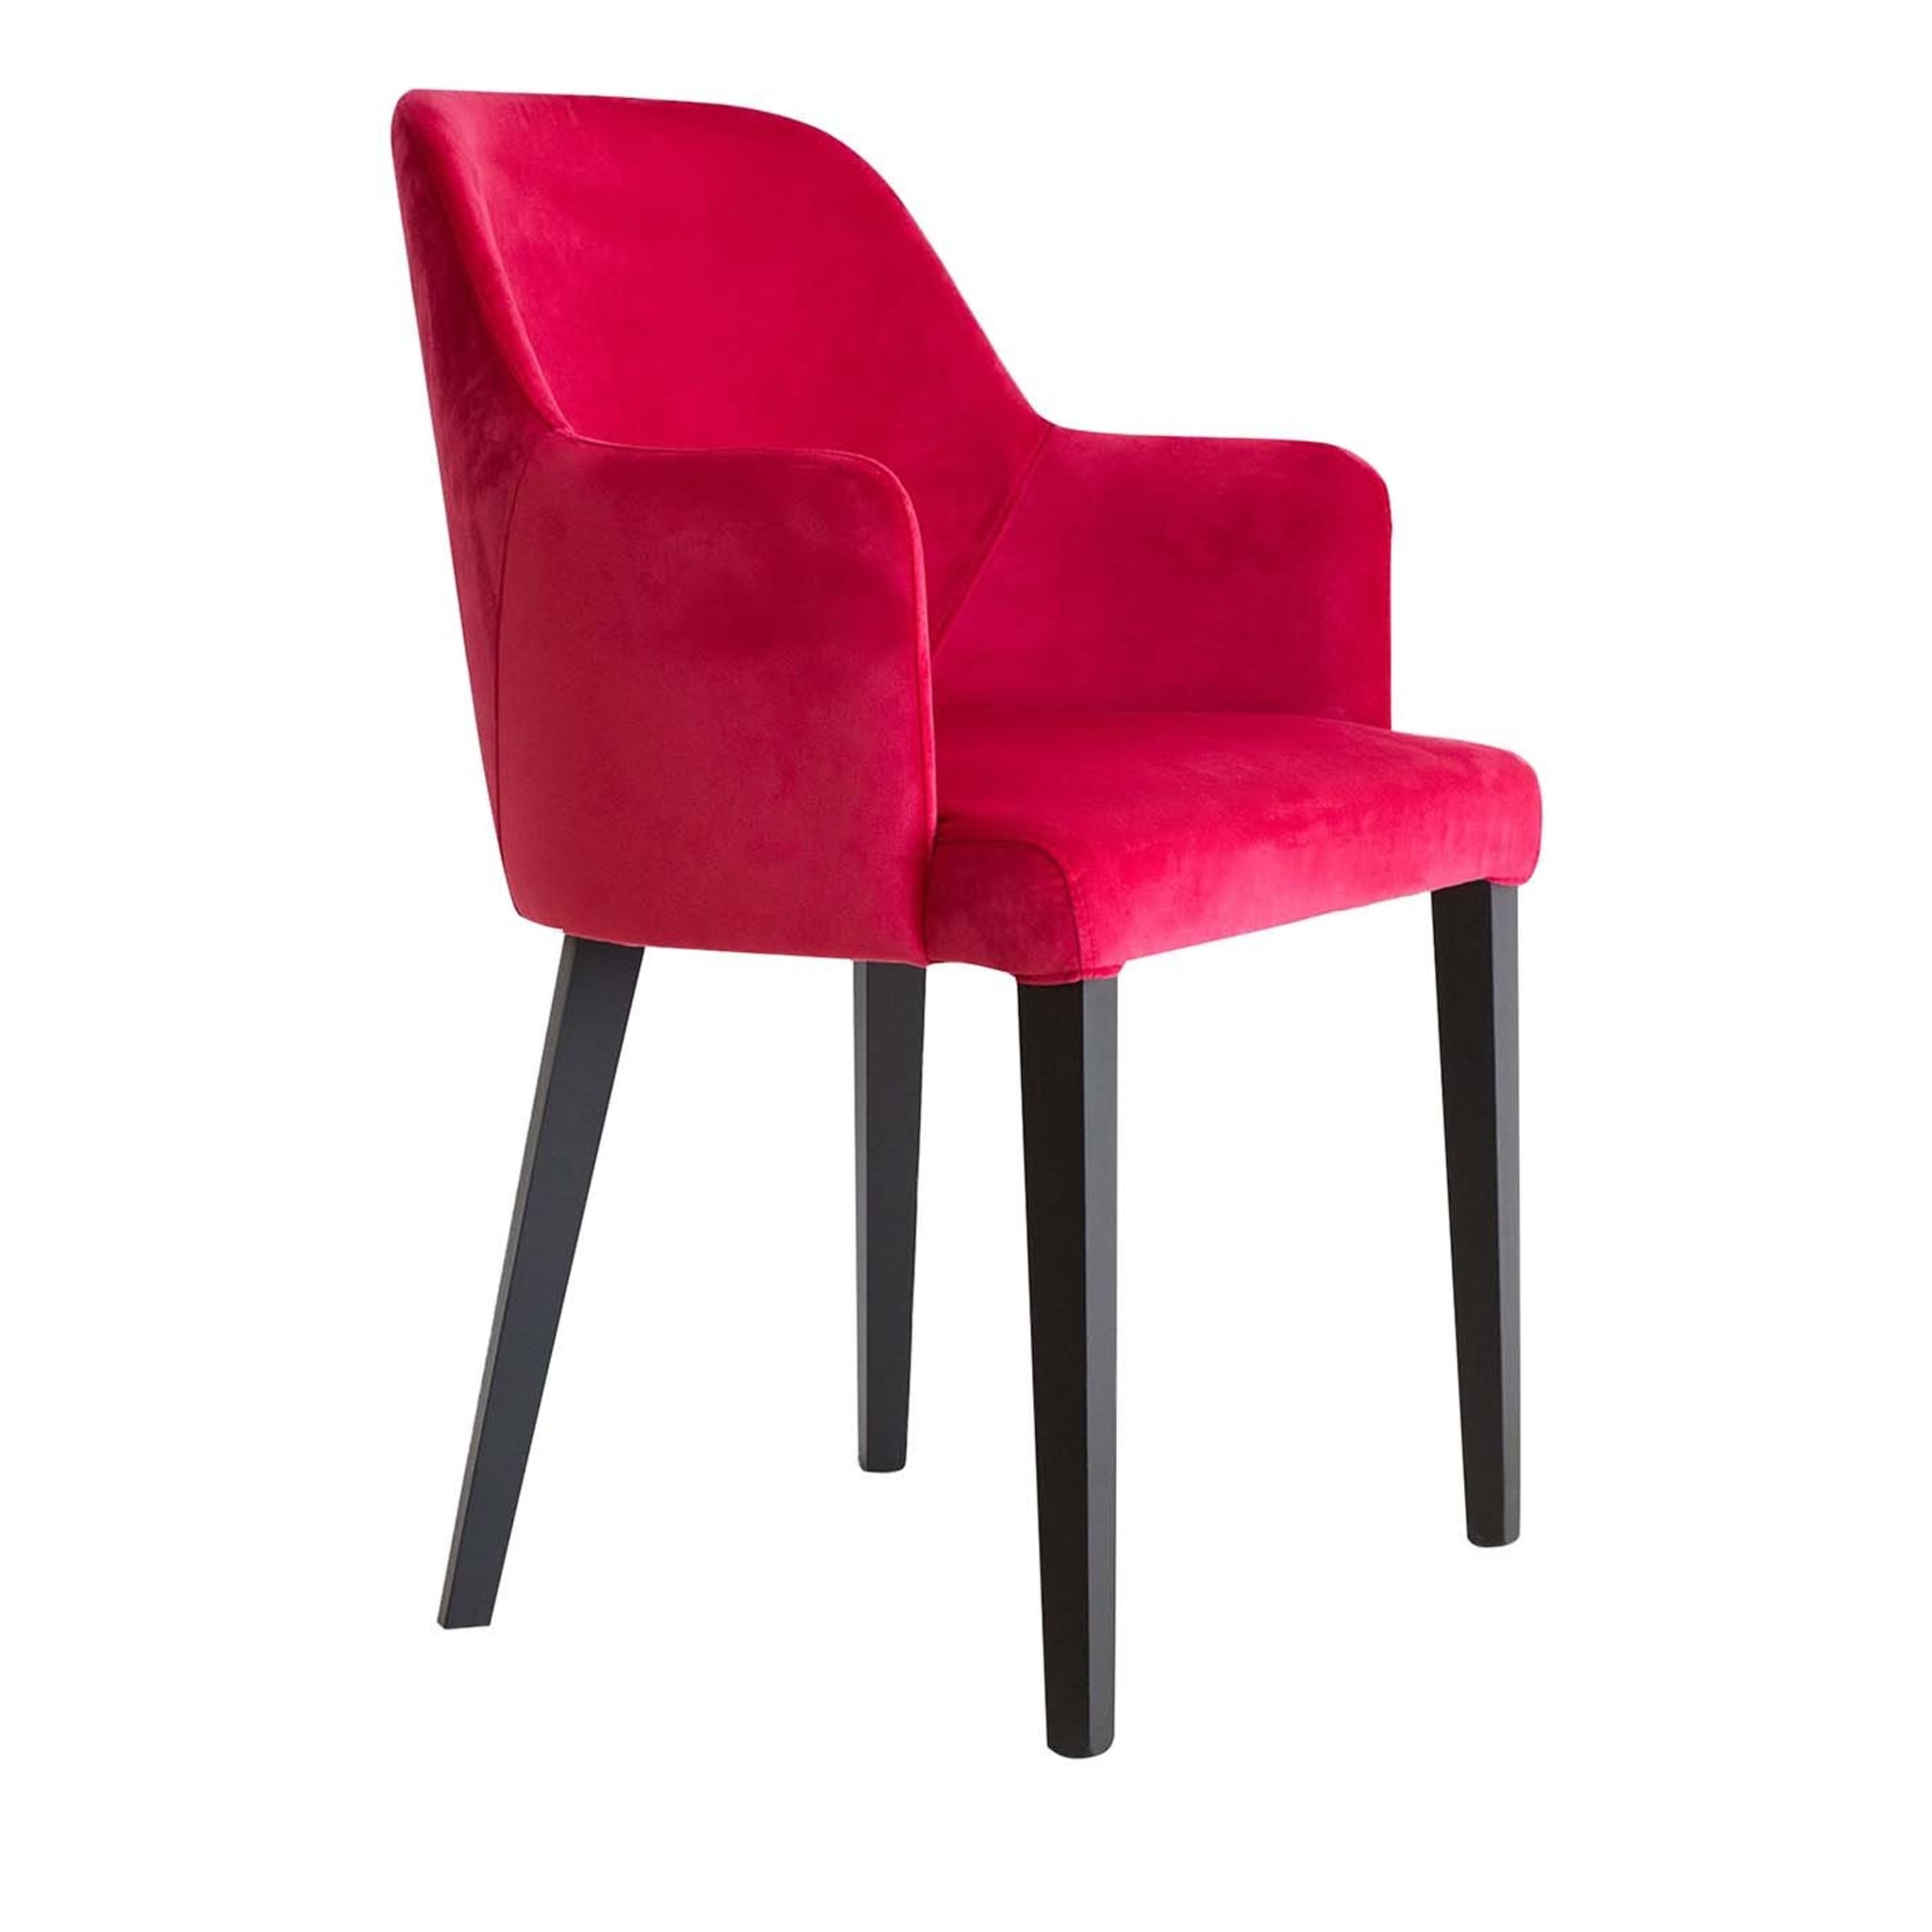 Set of 2 Avenue Red Chairs - Main view